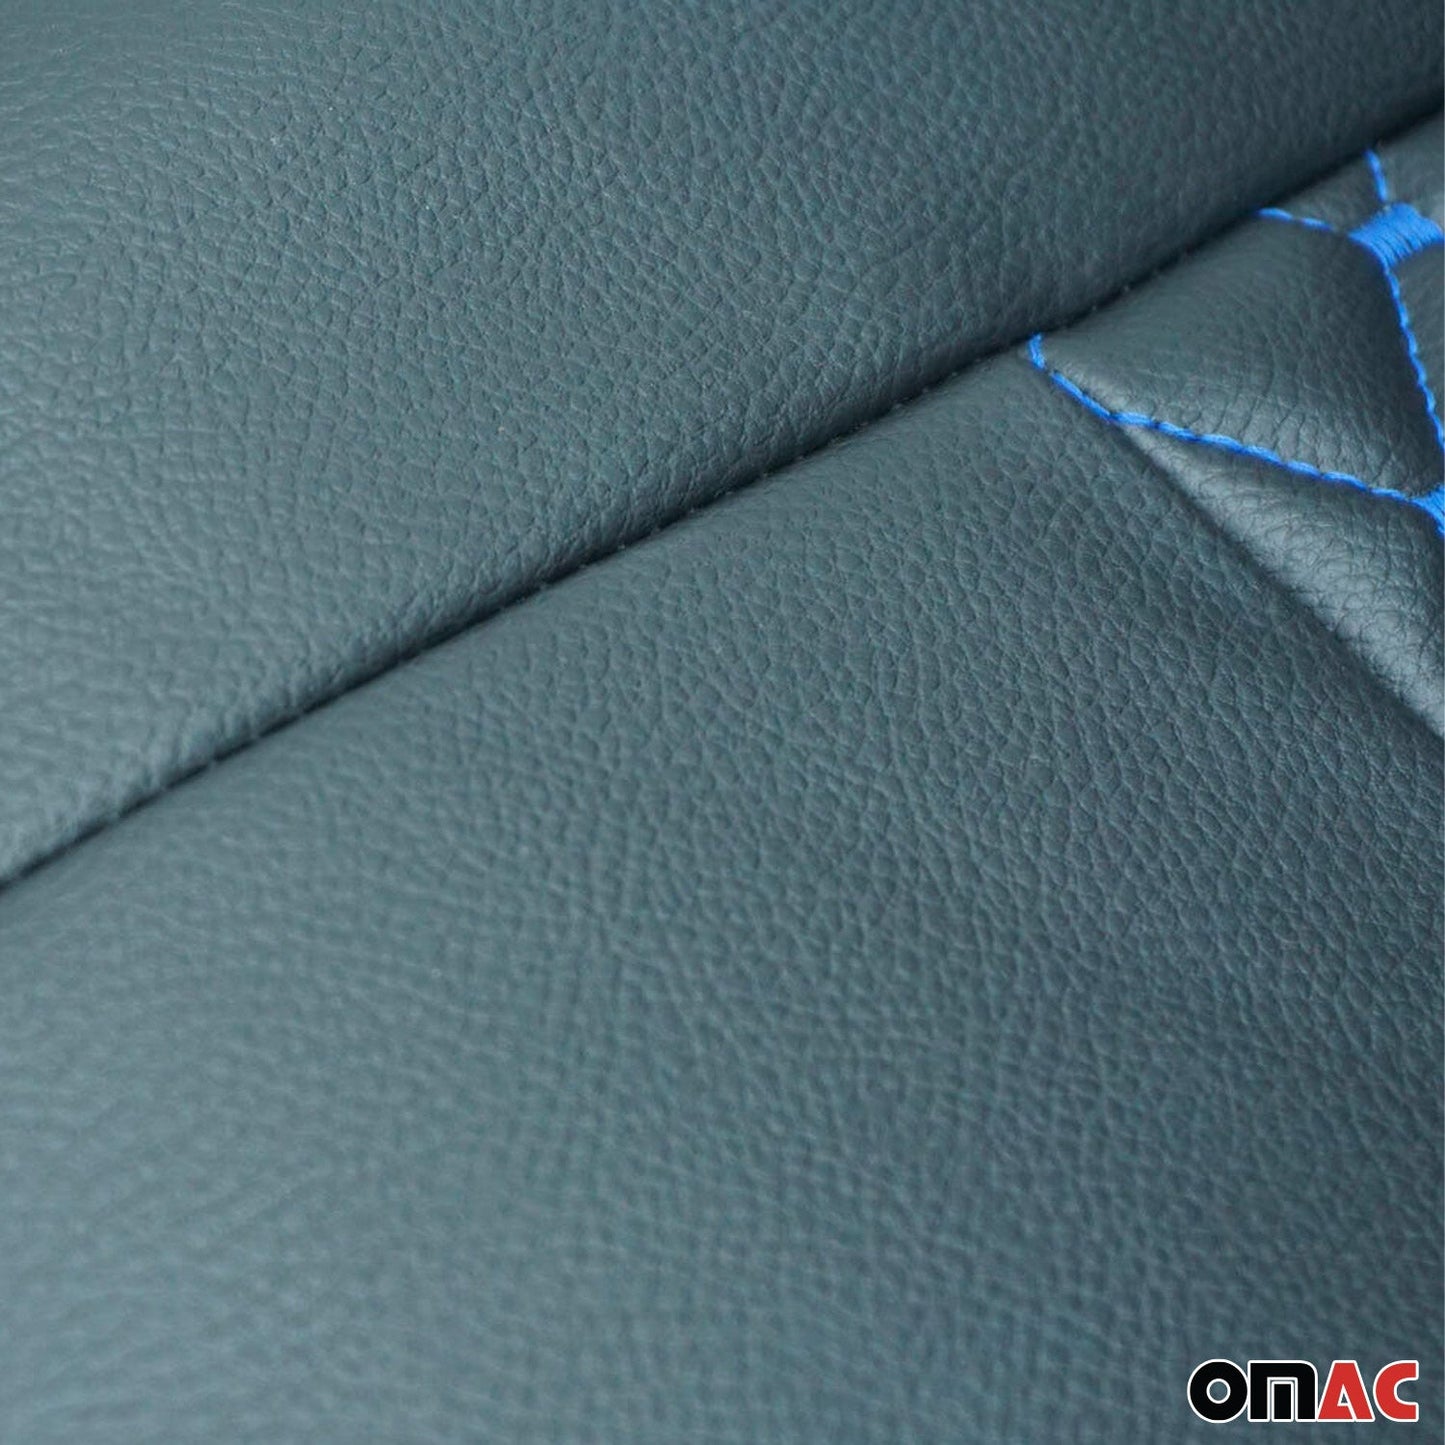 OMAC Leather Car Seat Covers Protector for VW Eurovan 1993-2003 Black Blue 2+1 7521321SM-2